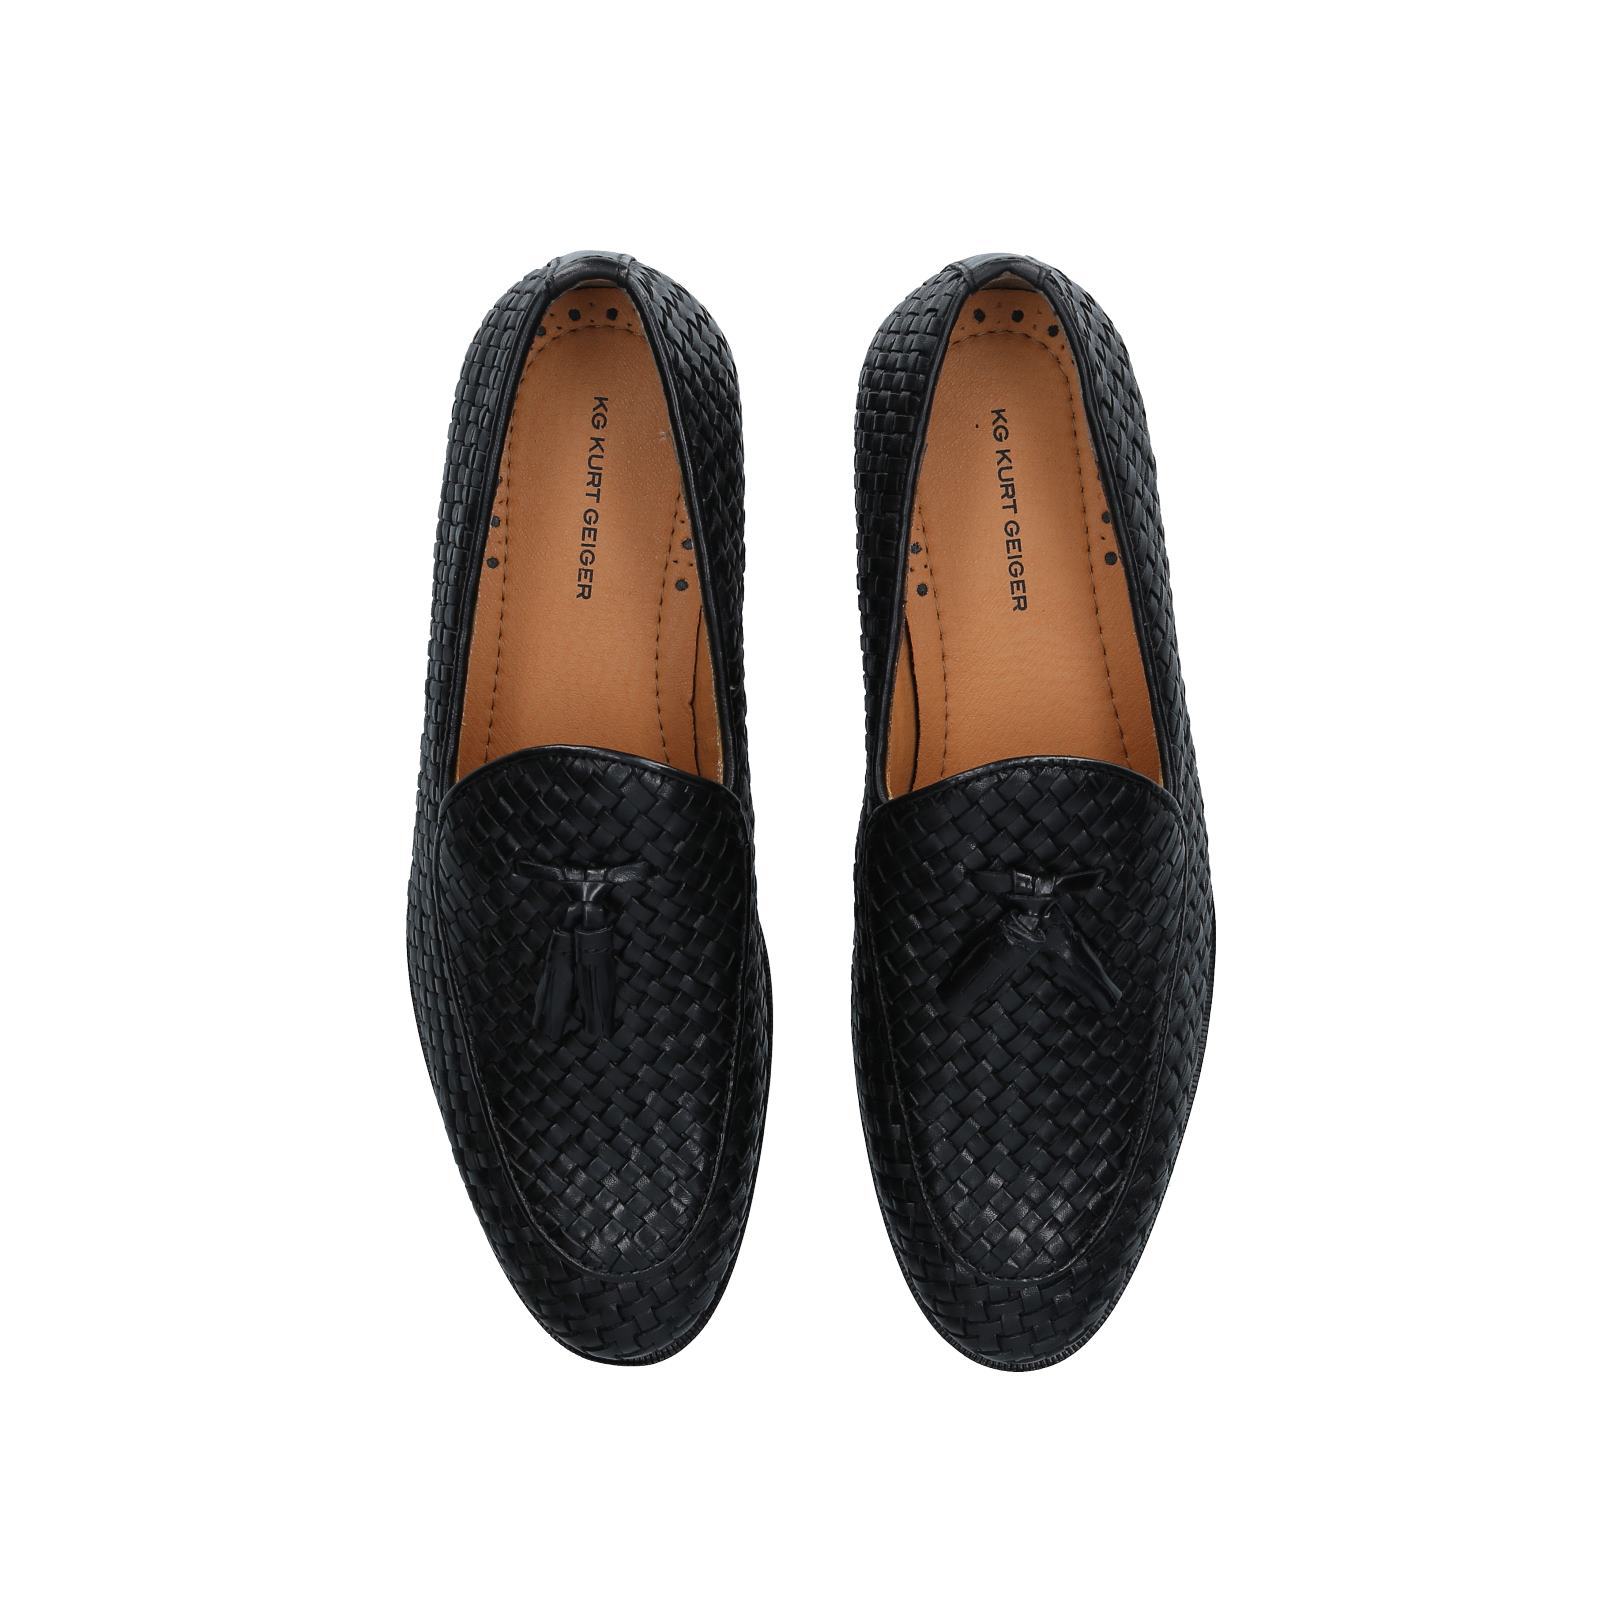 HAXSBY Black Loafers by KG KURT GEIGER